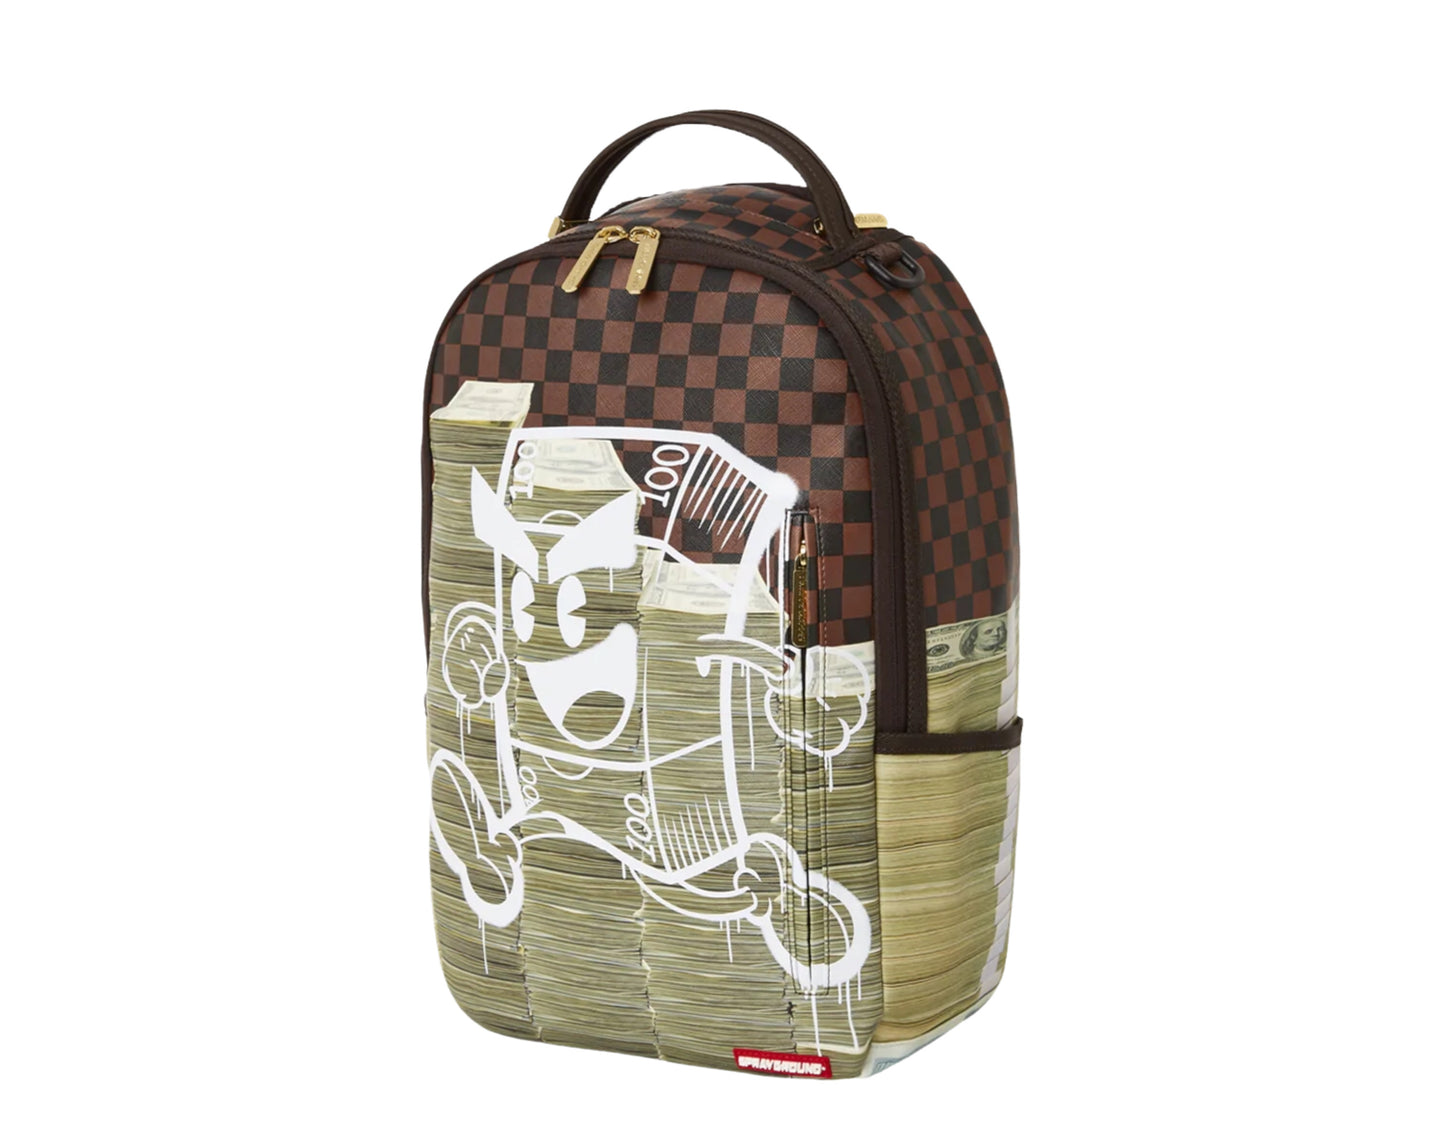 LOUIS VUITTON LV X NBA BROWN BACKPACK for Sale in Orlando